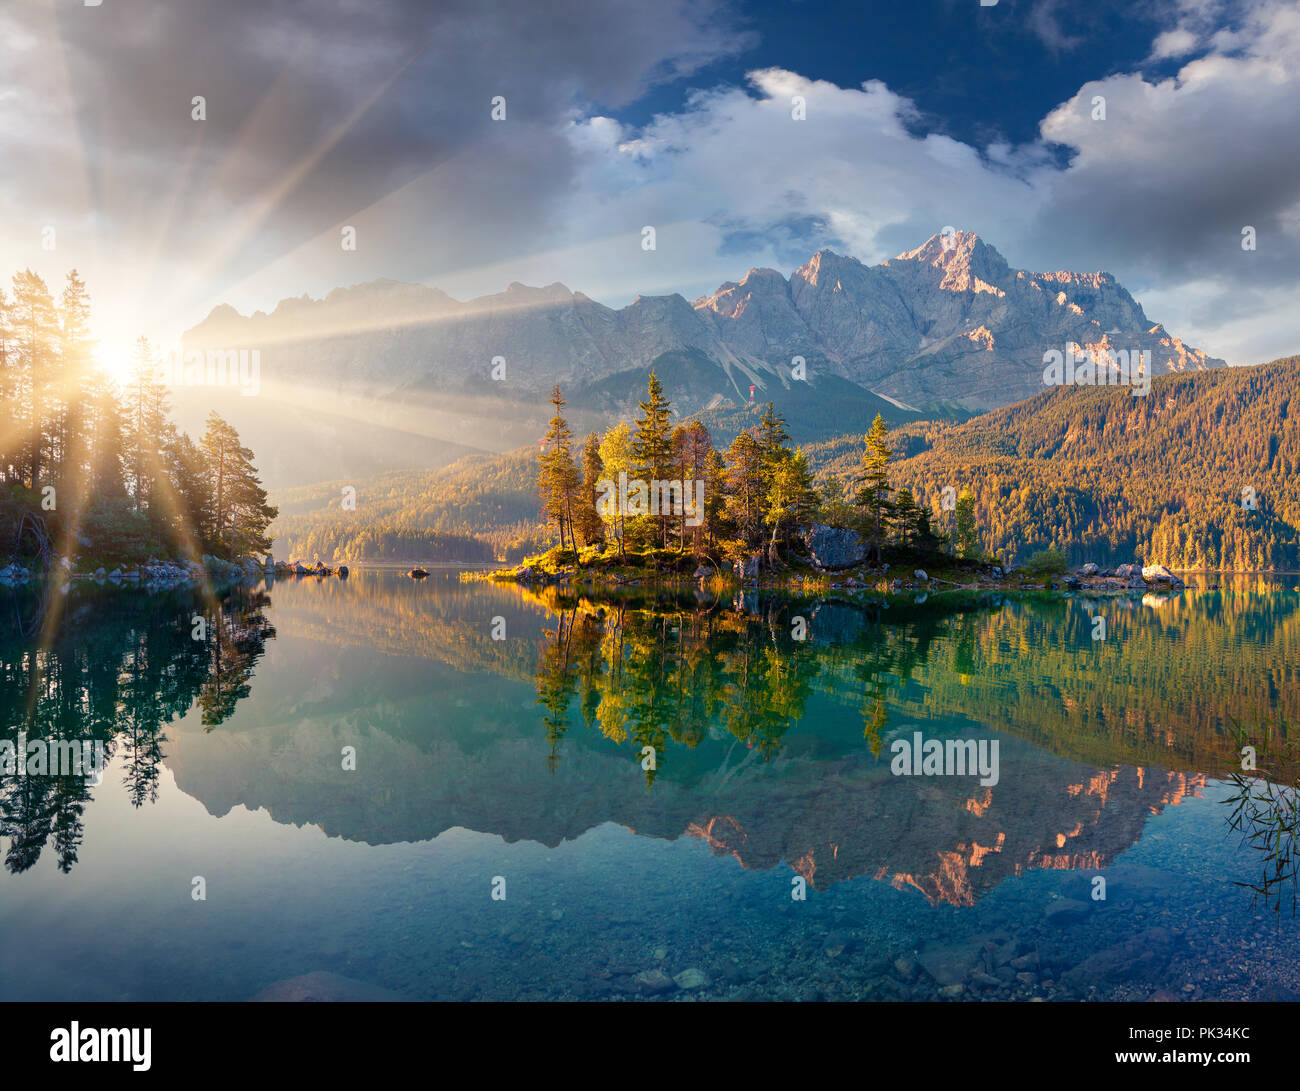 Misty summer morning on the Eibsee lake in German Alps. Germany, Europe. Stock Photo